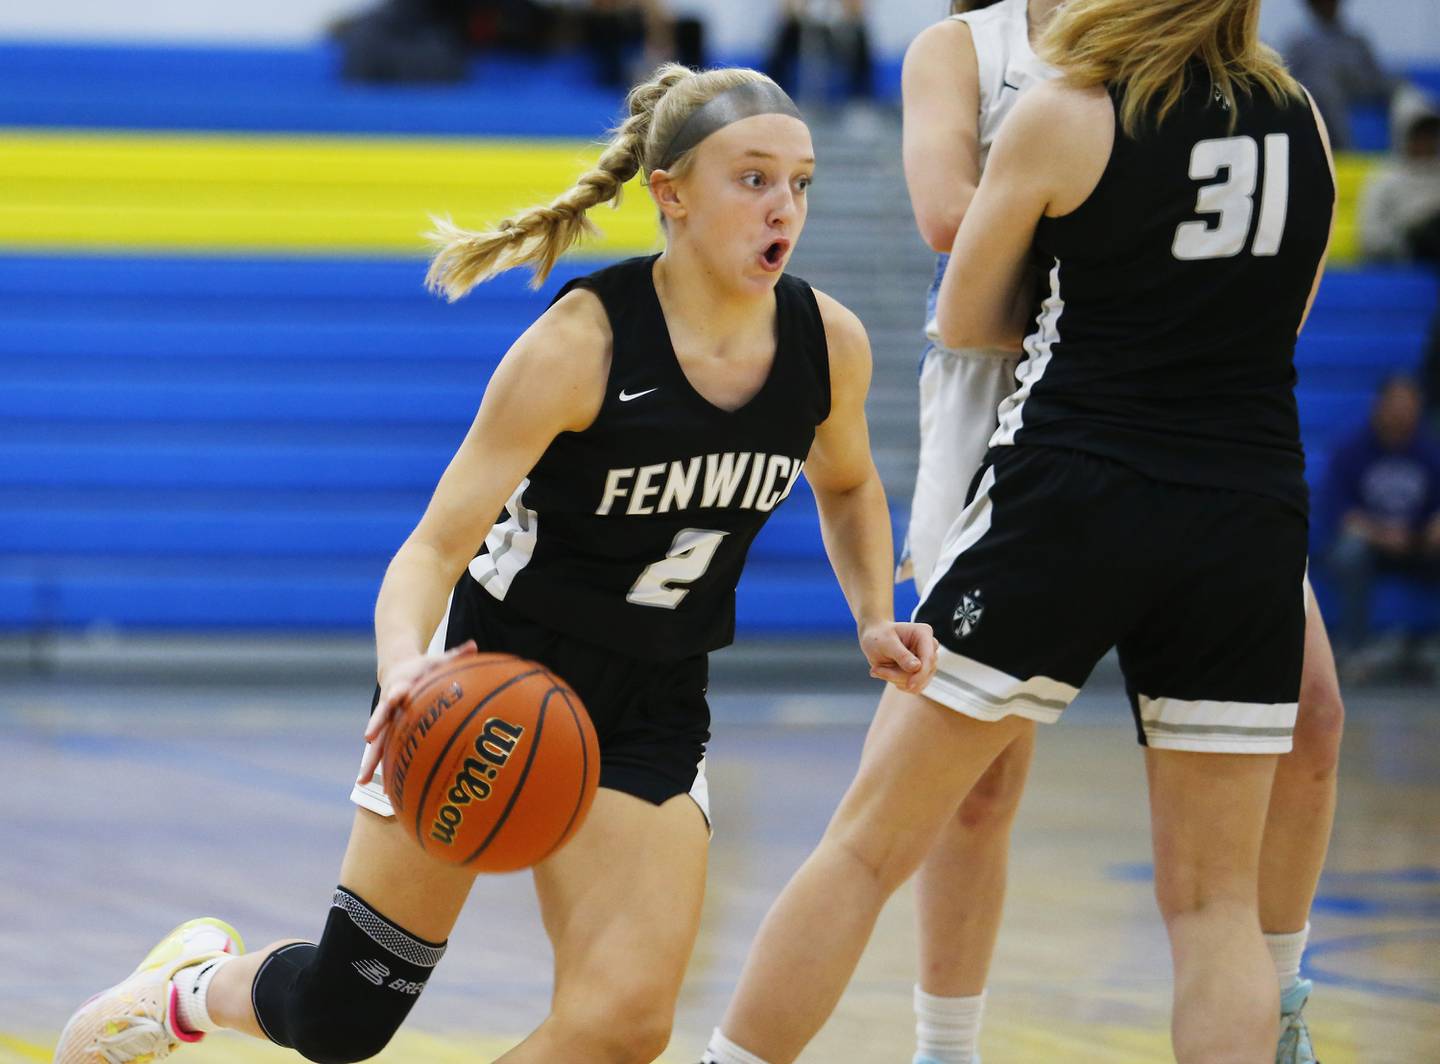 Fenwick's Mia Caccitolo drives to the basket during the girls IHSA 3A Supersectional basketball game between Nazareth Academy and Fenwick High School on Monday, February 28, 2022 at De La Salle High School in Chicago.